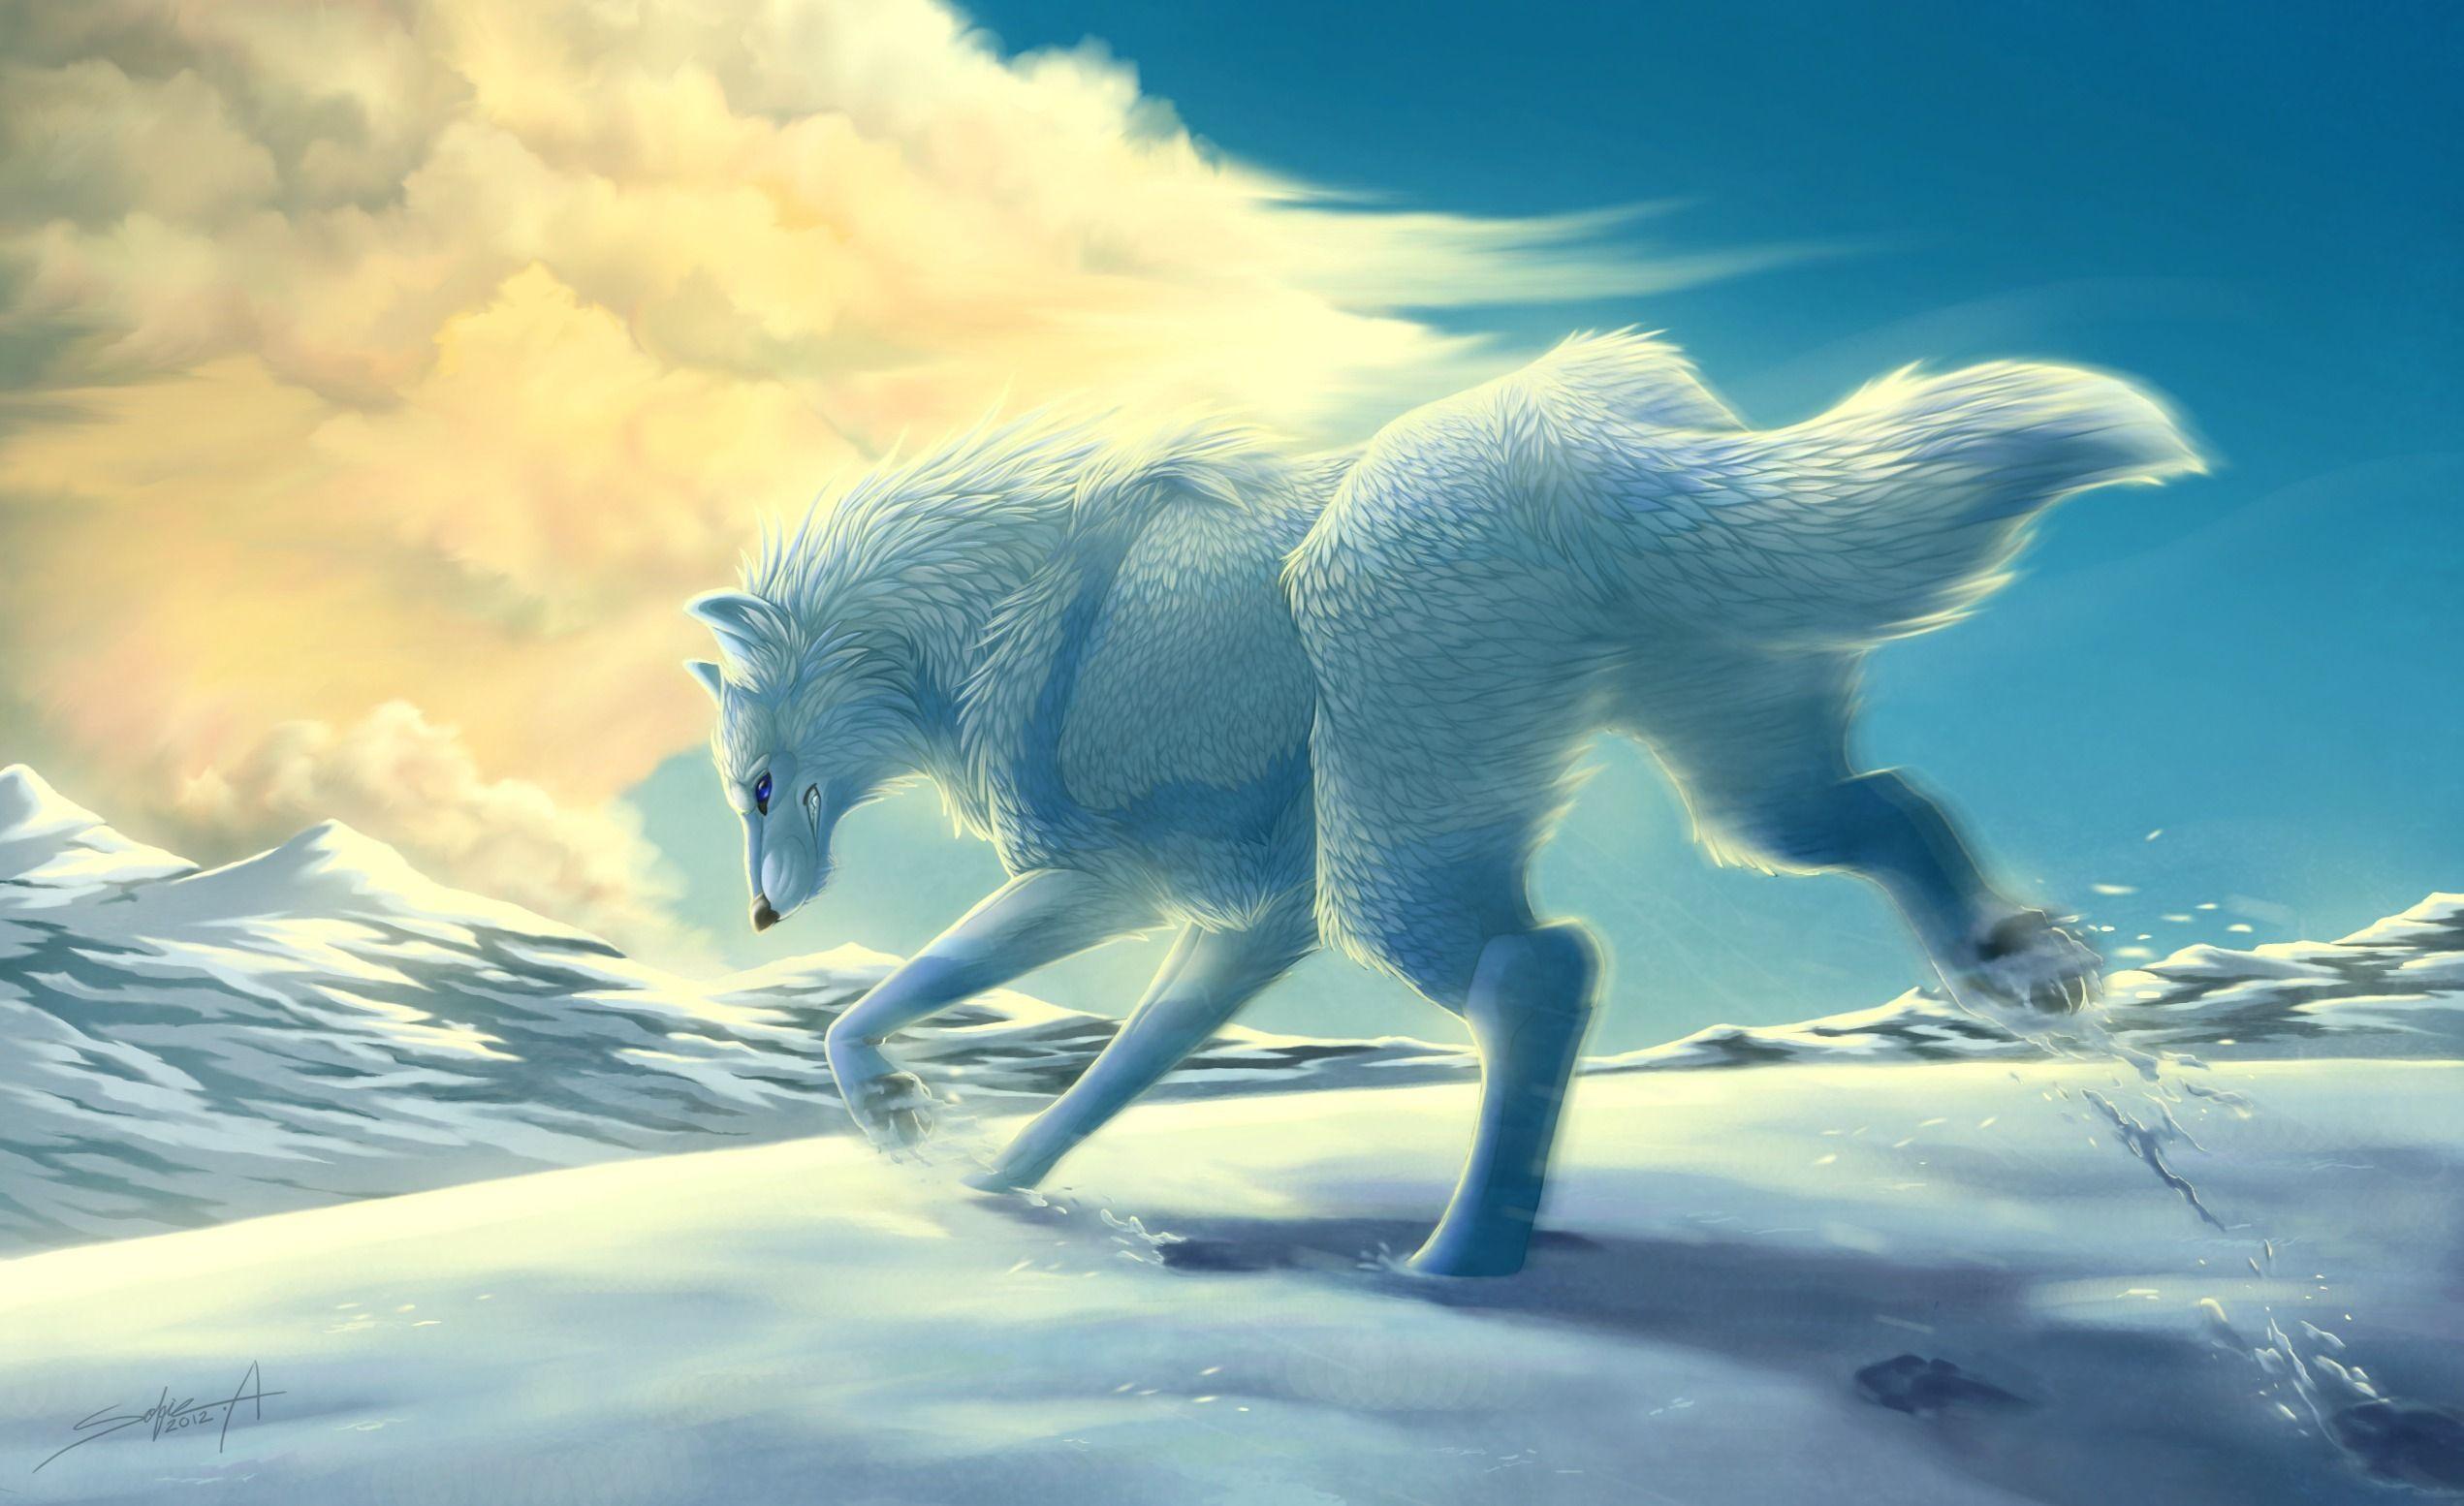 Snow, wolf wallpaper and image, picture, photo